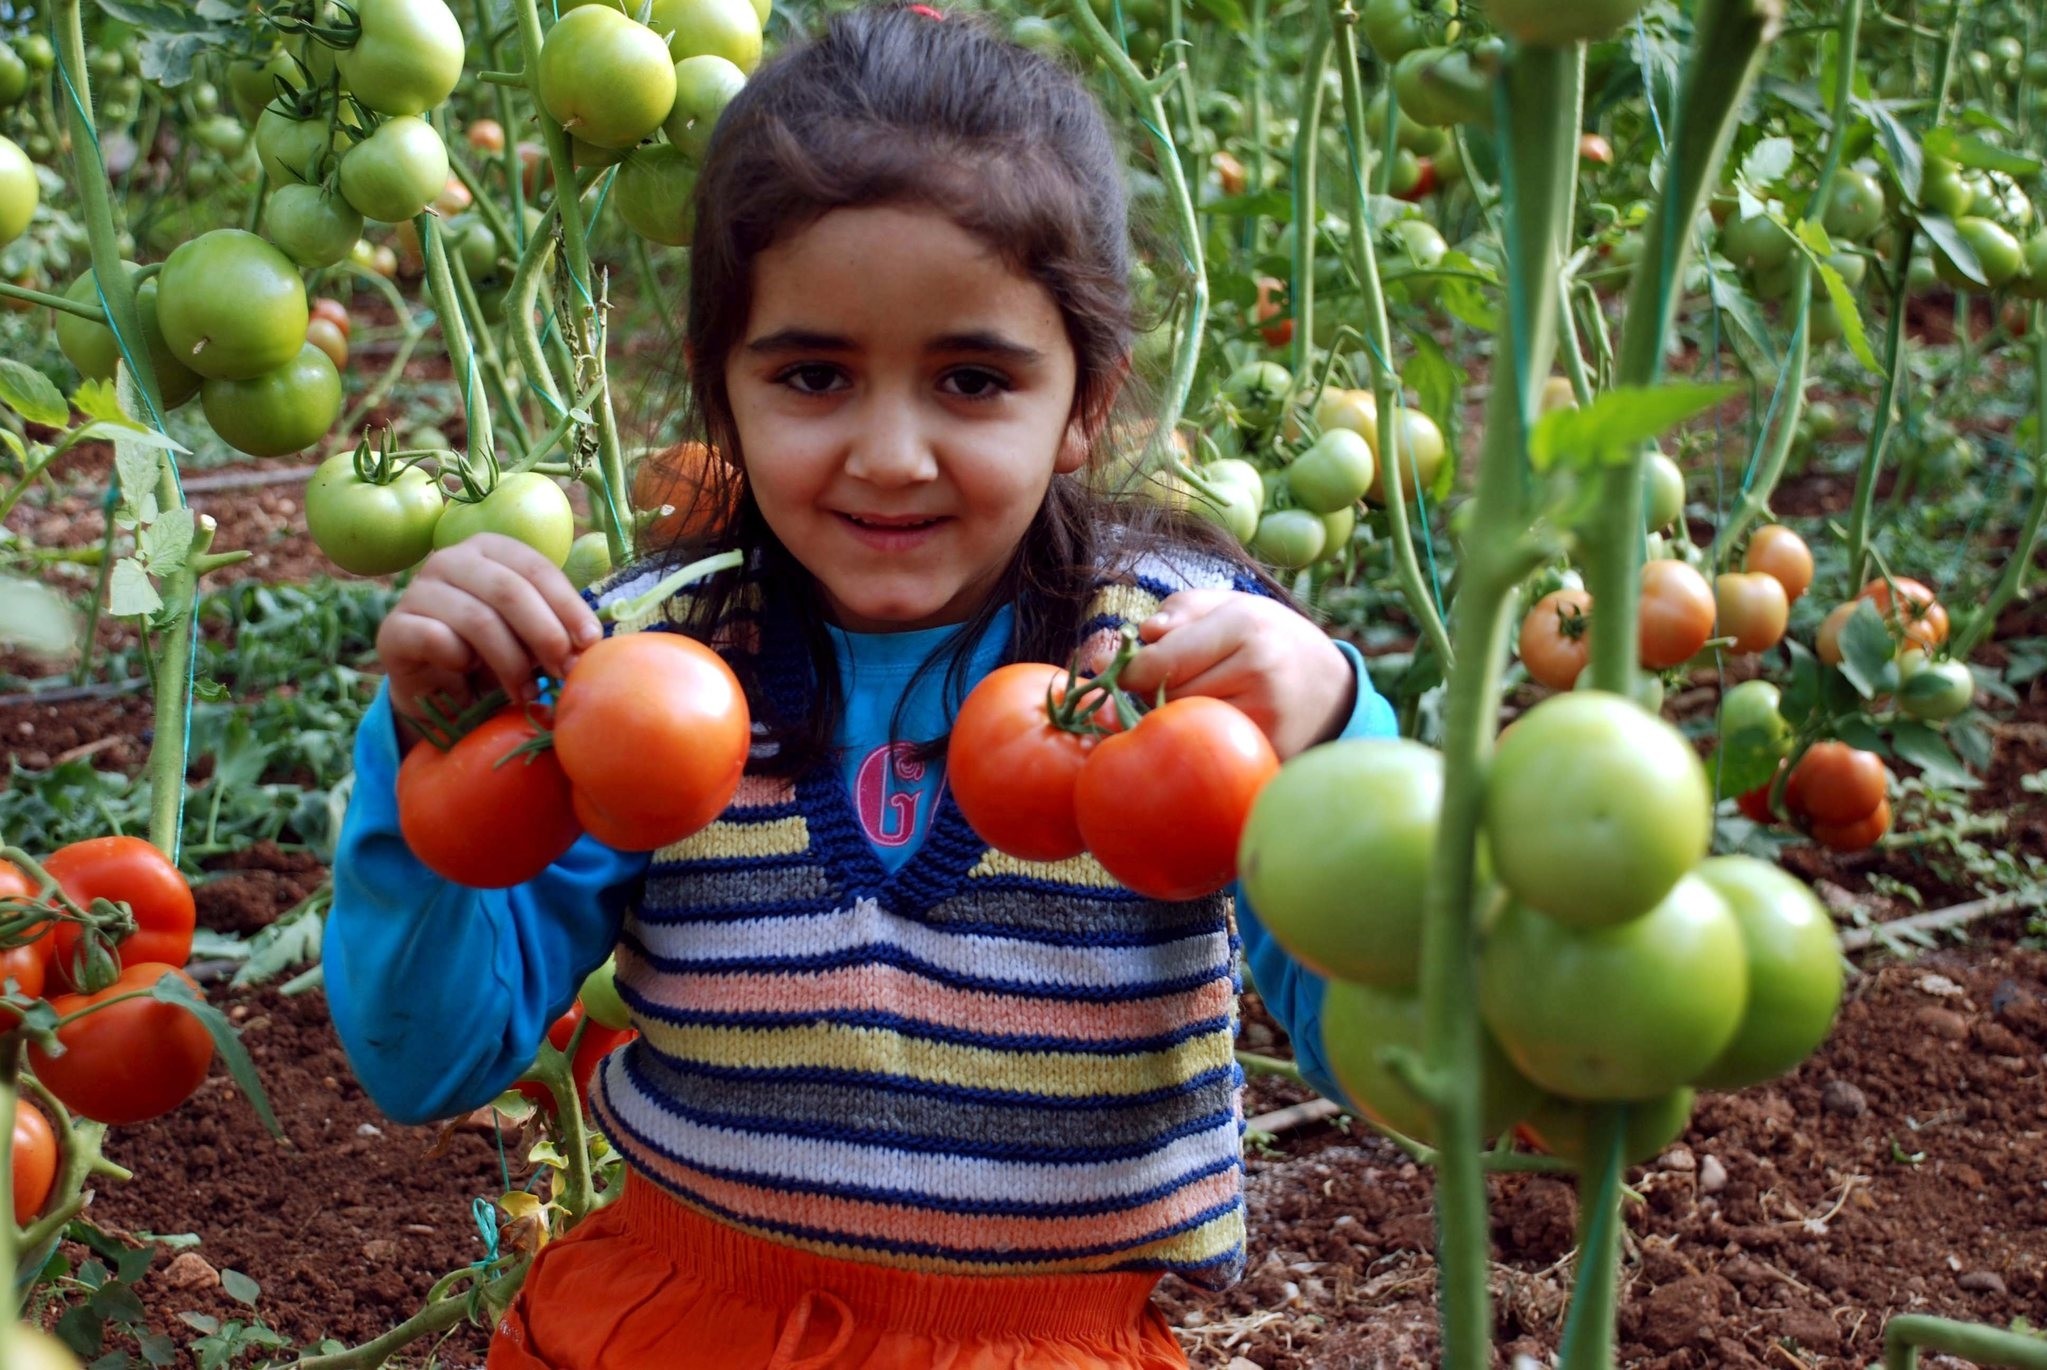 A Turkish child holding tomatoes in Mersin which exported almost 90 percent  of its tomato production to Russia prior to the embargo.